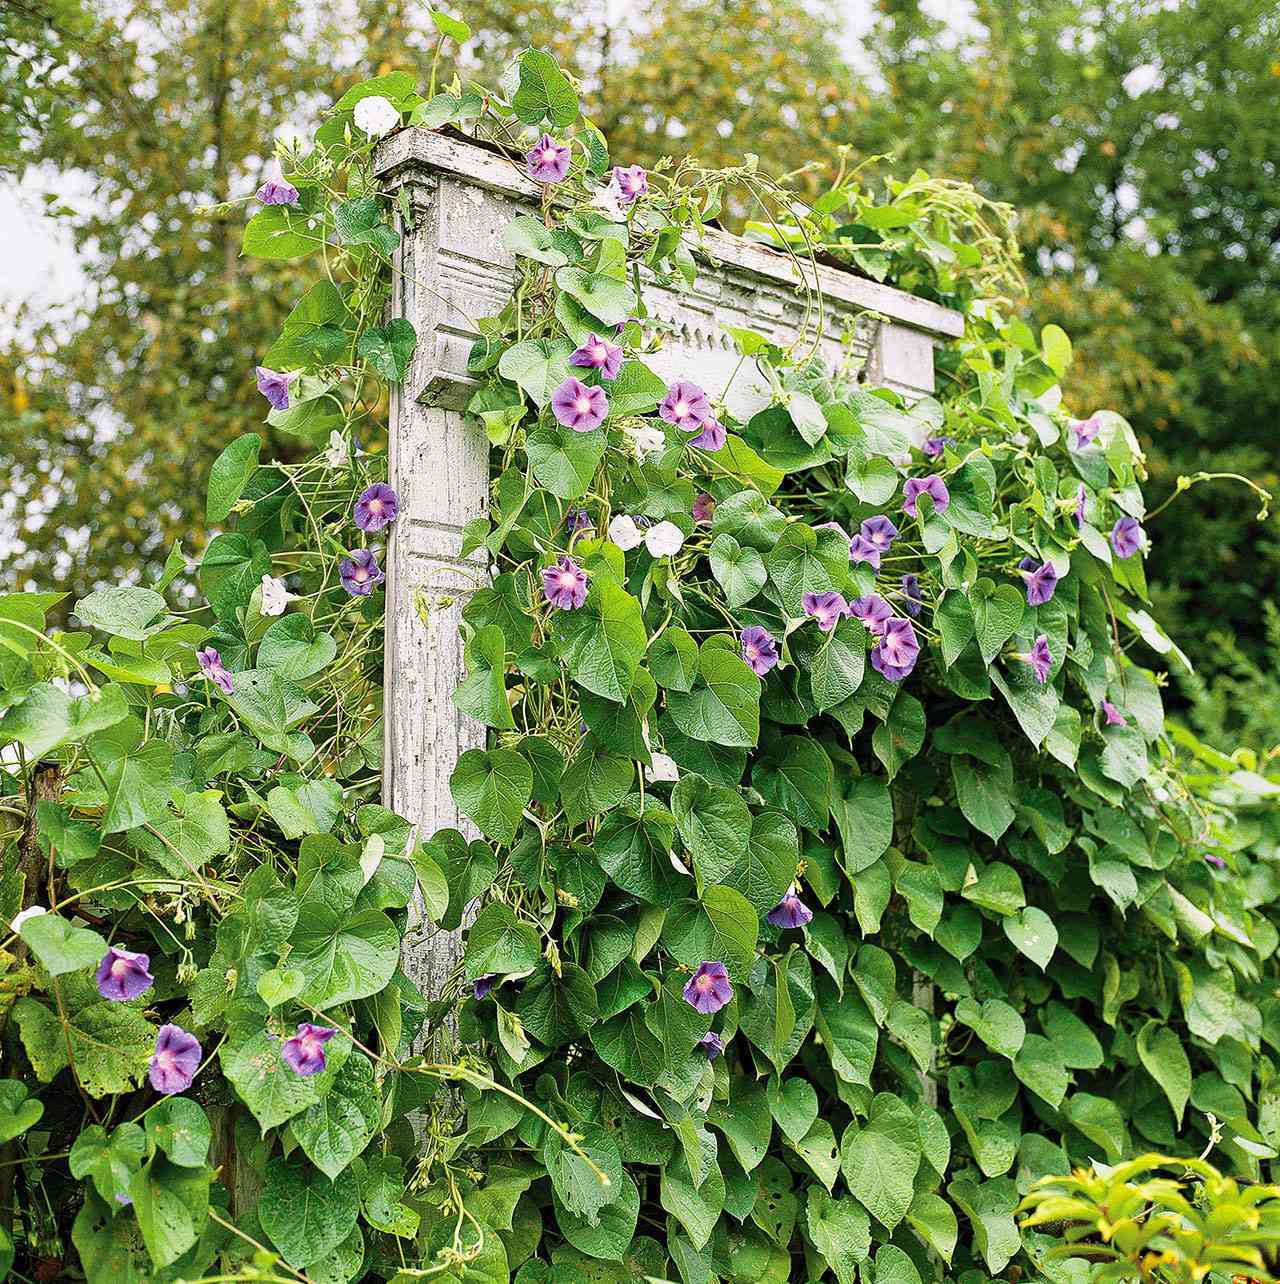 Vine Support Ideas To Take Your Garden To The Next Level Better Homes Gardens - Money Plant Support Ideas